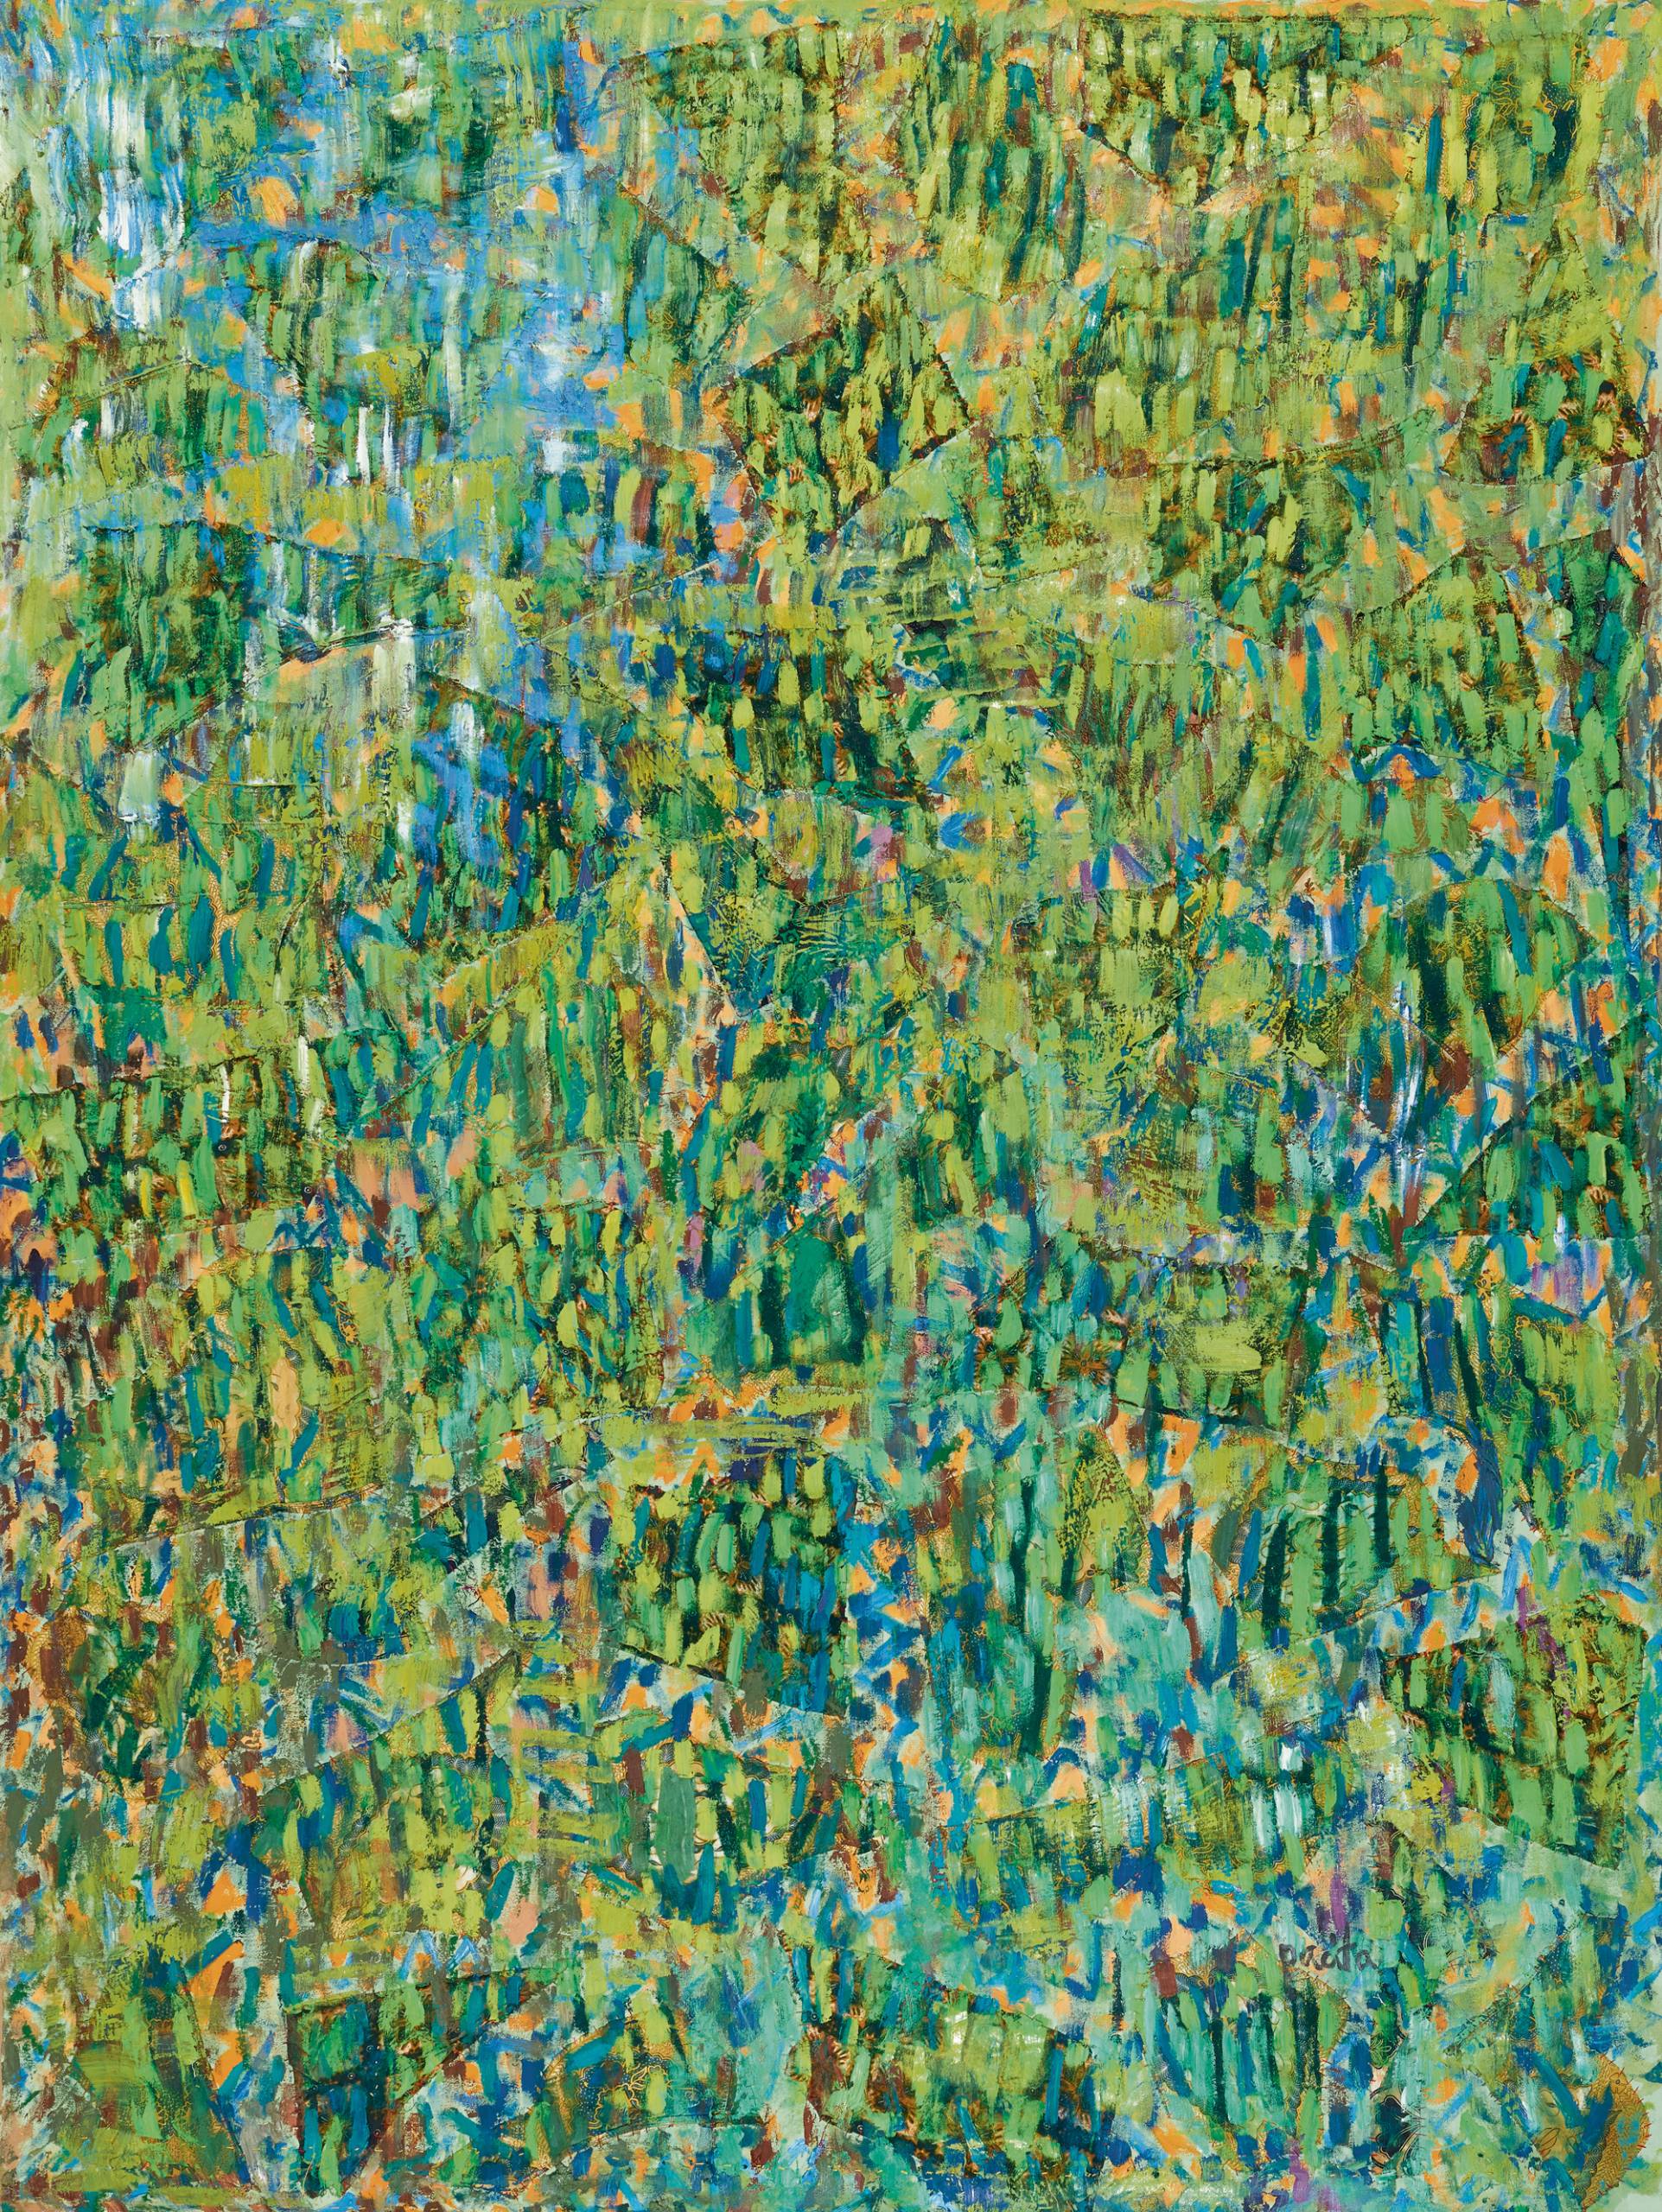 Vertical canvas with blue, green and golden brushstrokes conveying grass